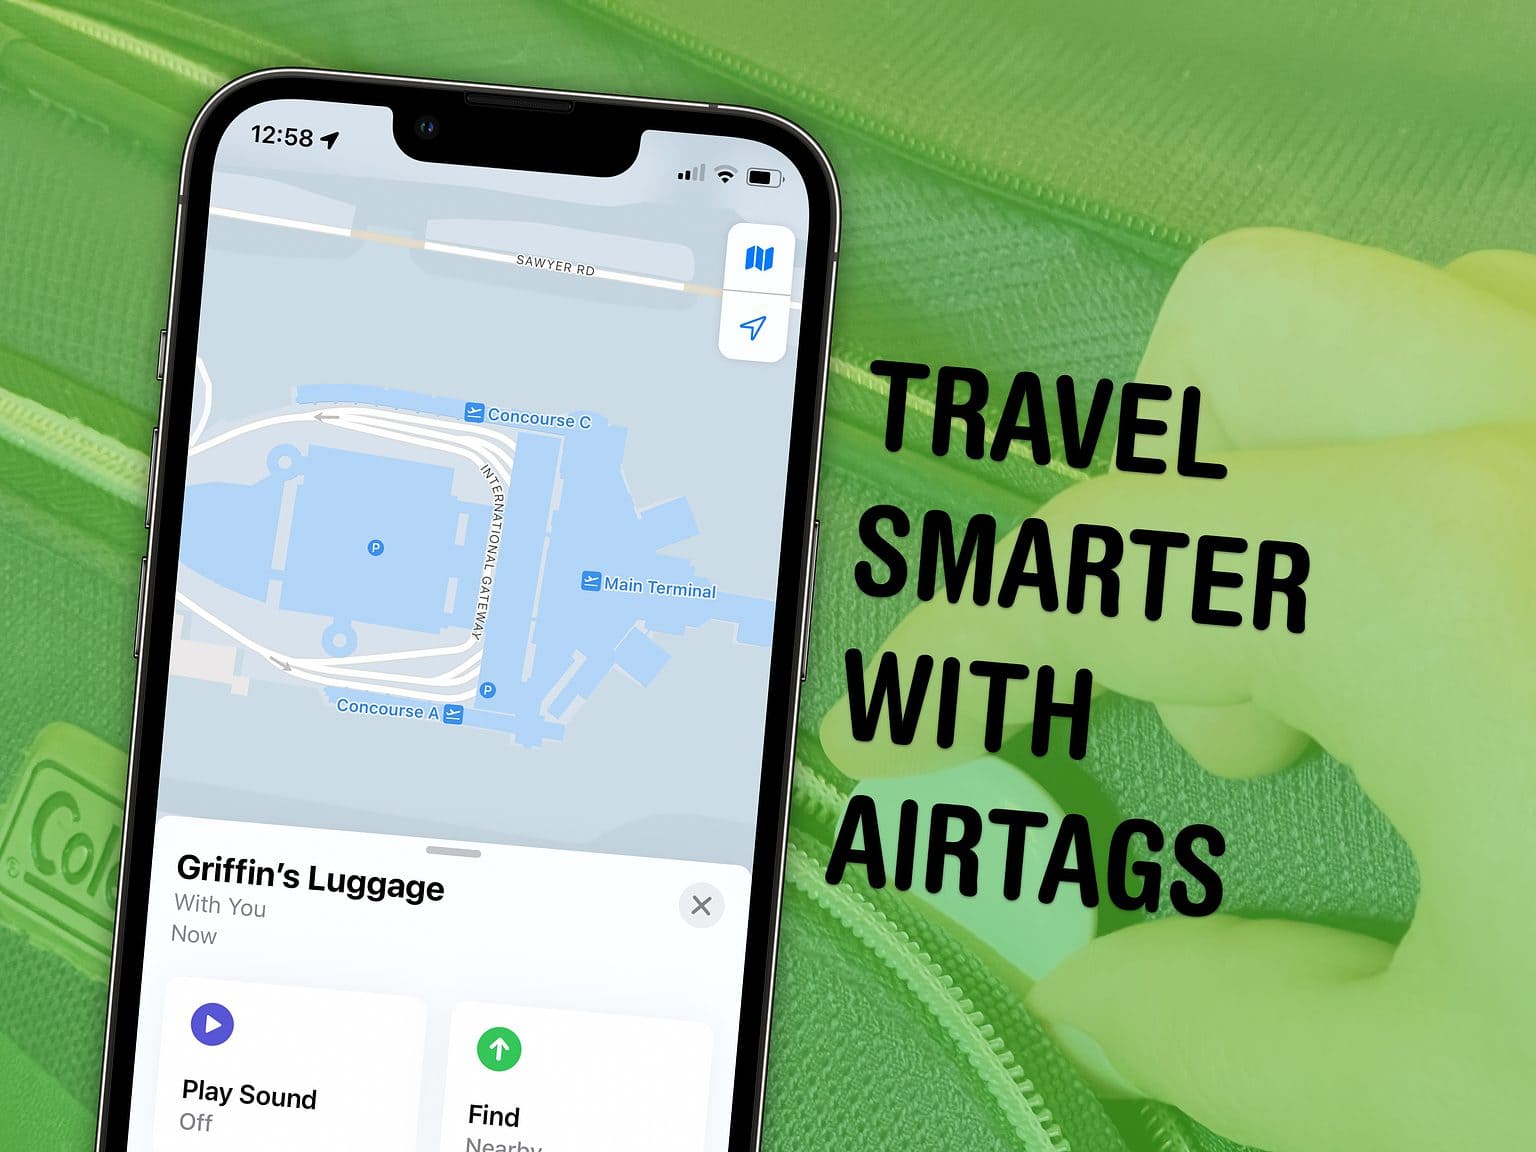 Travel smarter with AirTags